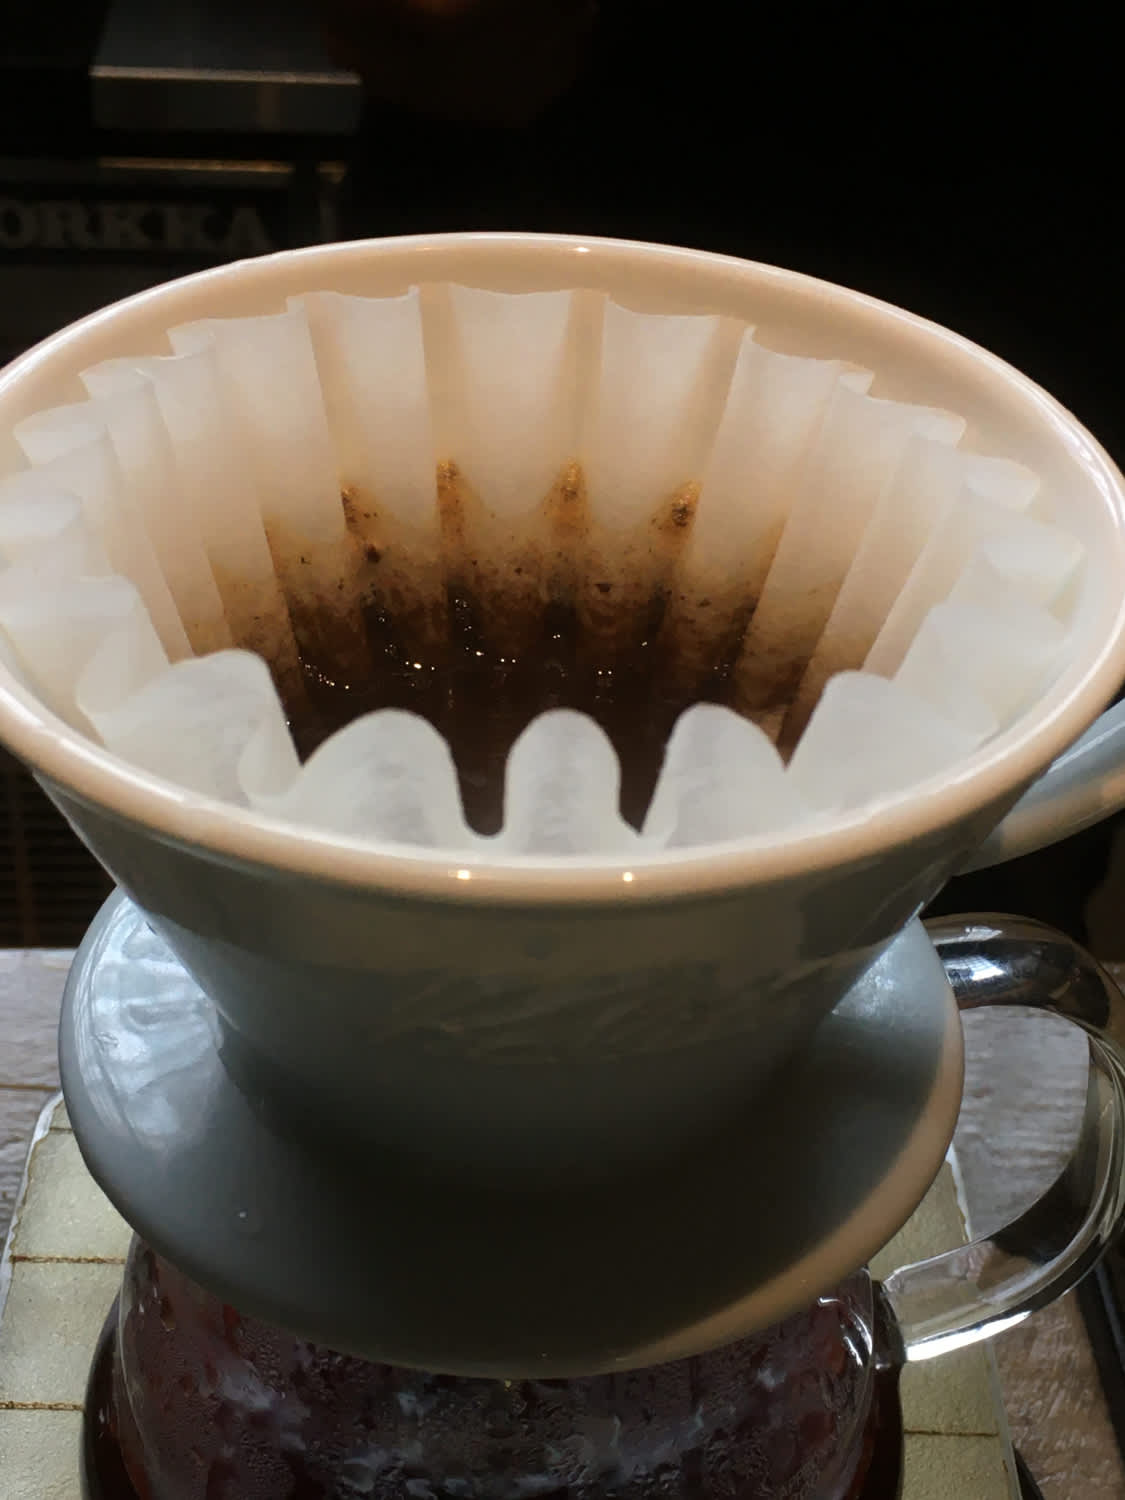 the rest of the coffee brewing using a manual tool for brewing kalita wave